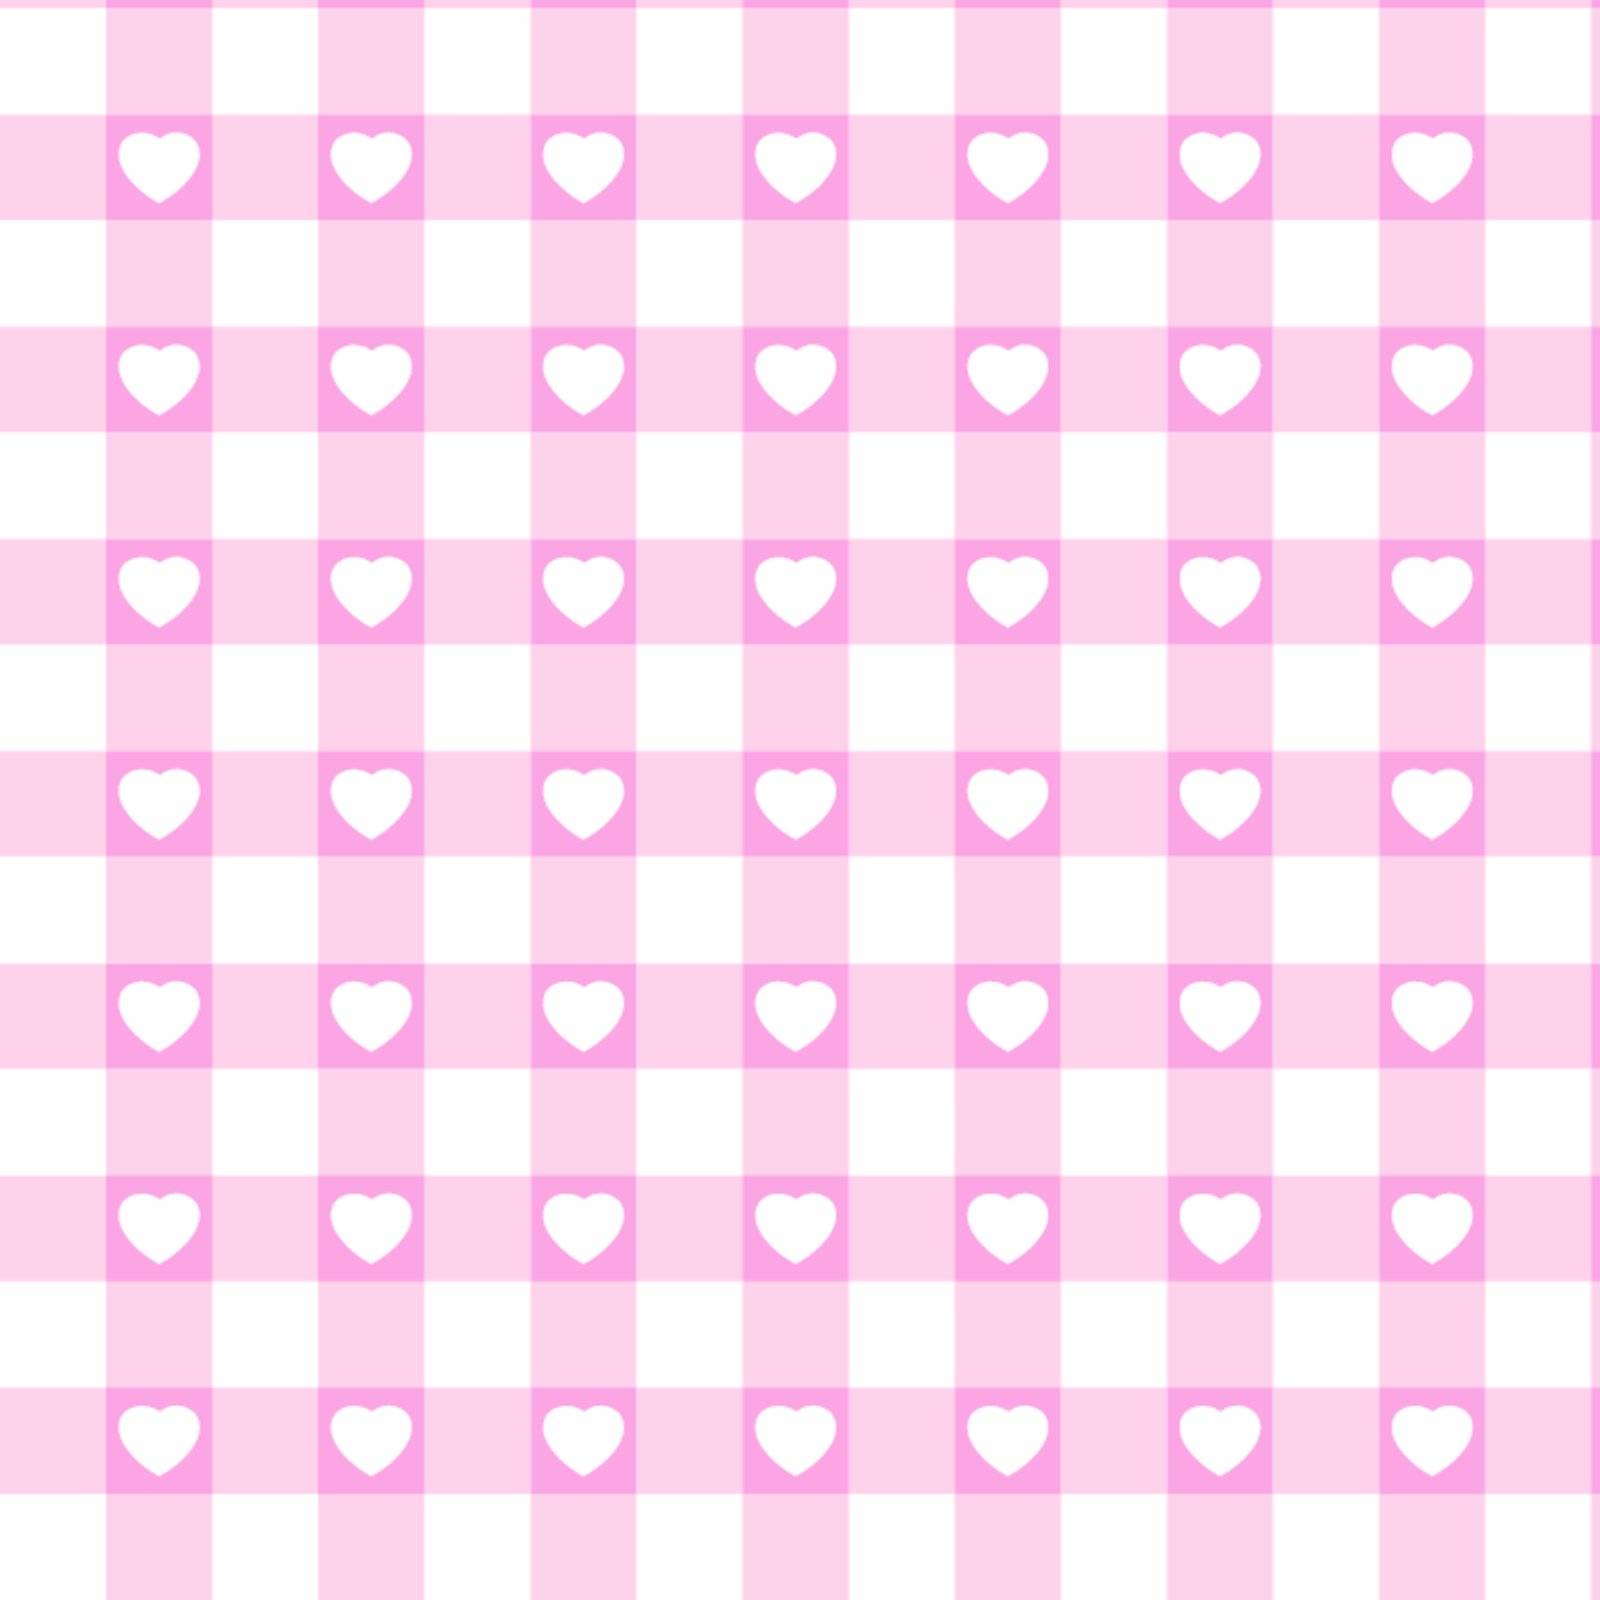 Swatch ready seamless Hearts & Gingham vintage design in pastel pink background. EPS 8 vector file included